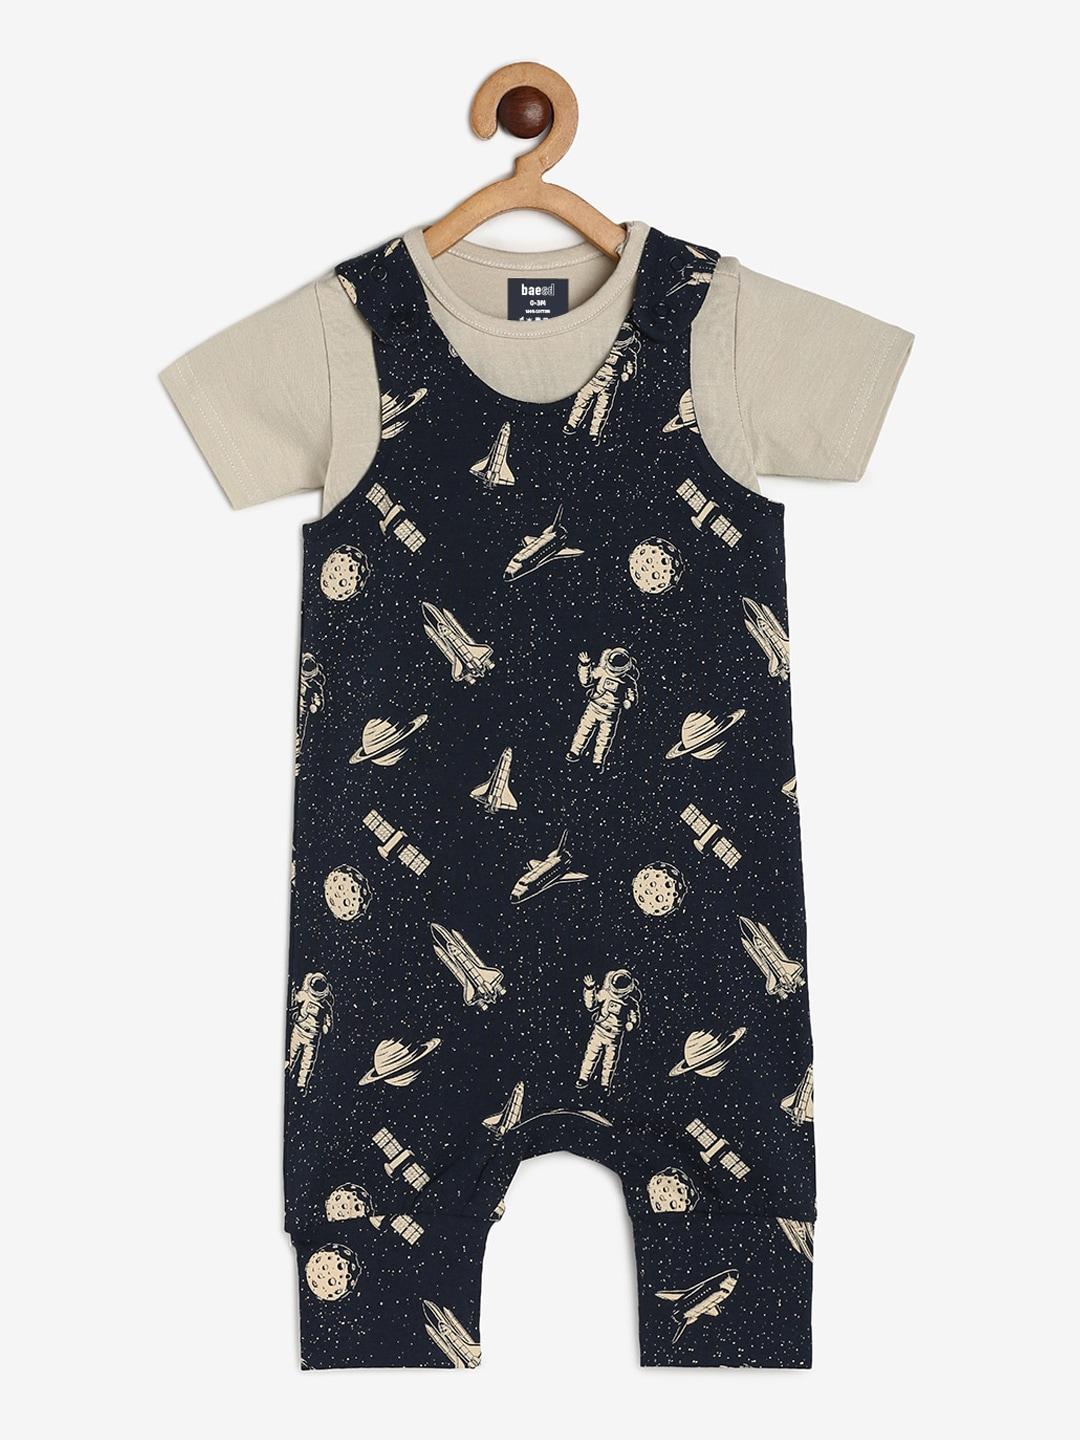 baesd-infants-conversational-printed-dungaree-with-t-shirt